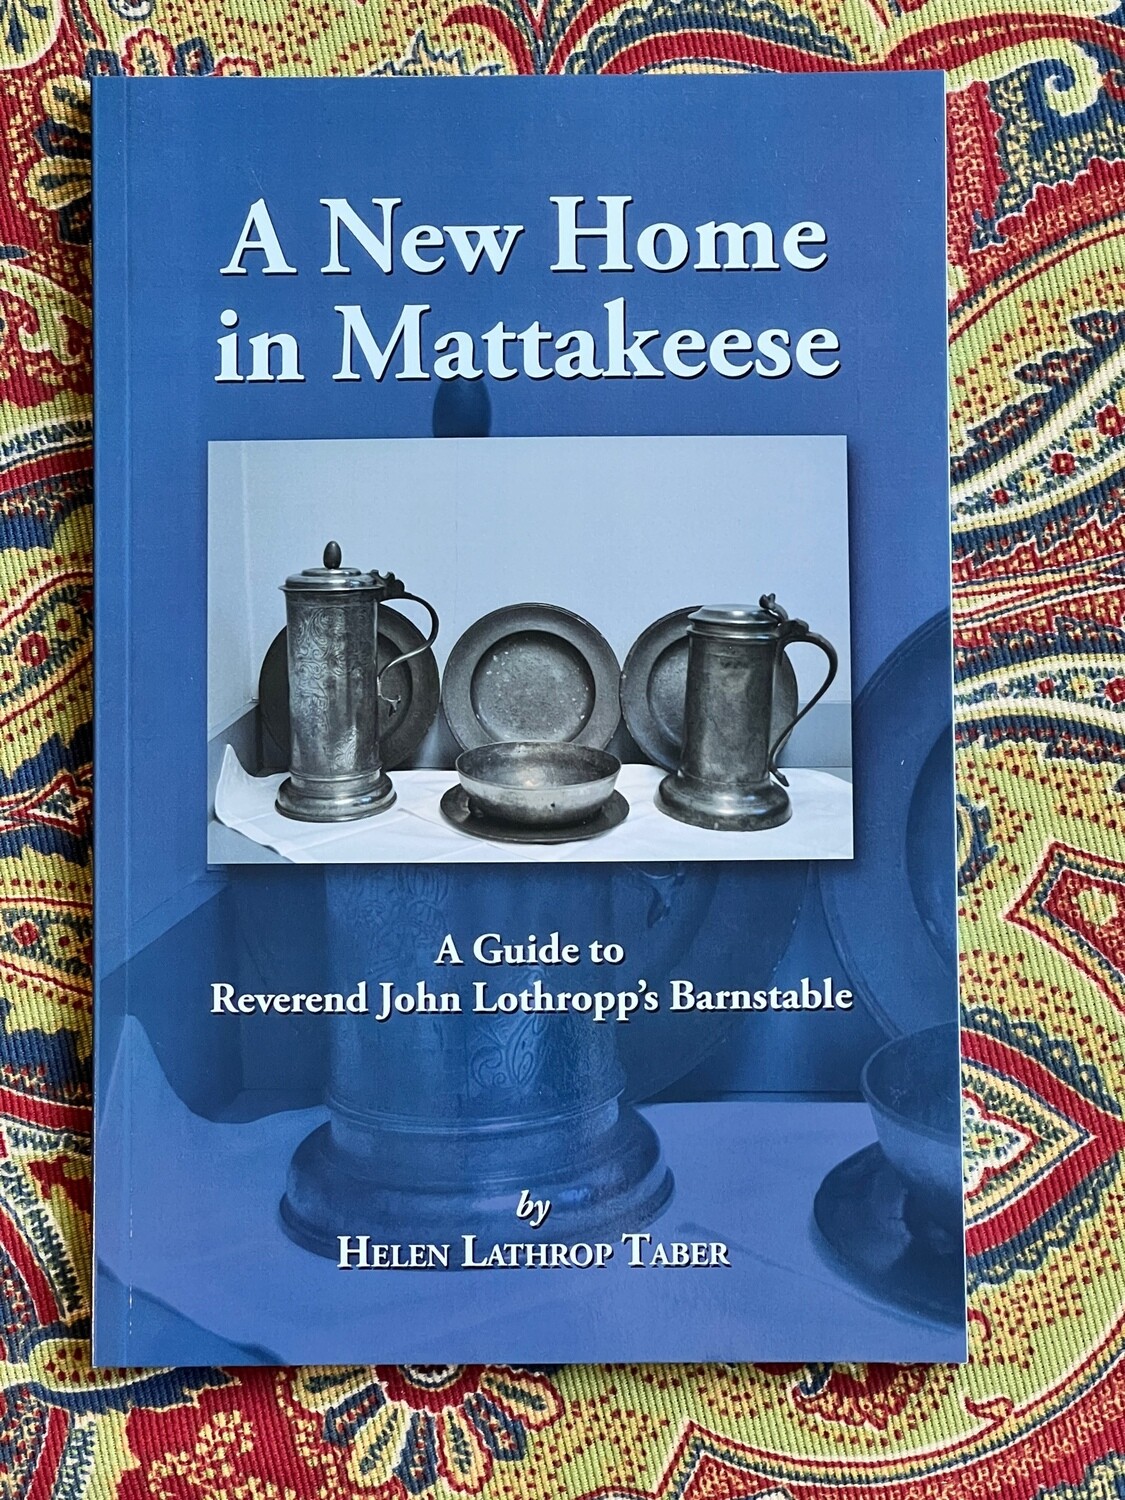 A New Home in Mattakeese : A Guide to Reverend John Lothropp’s Barnstable